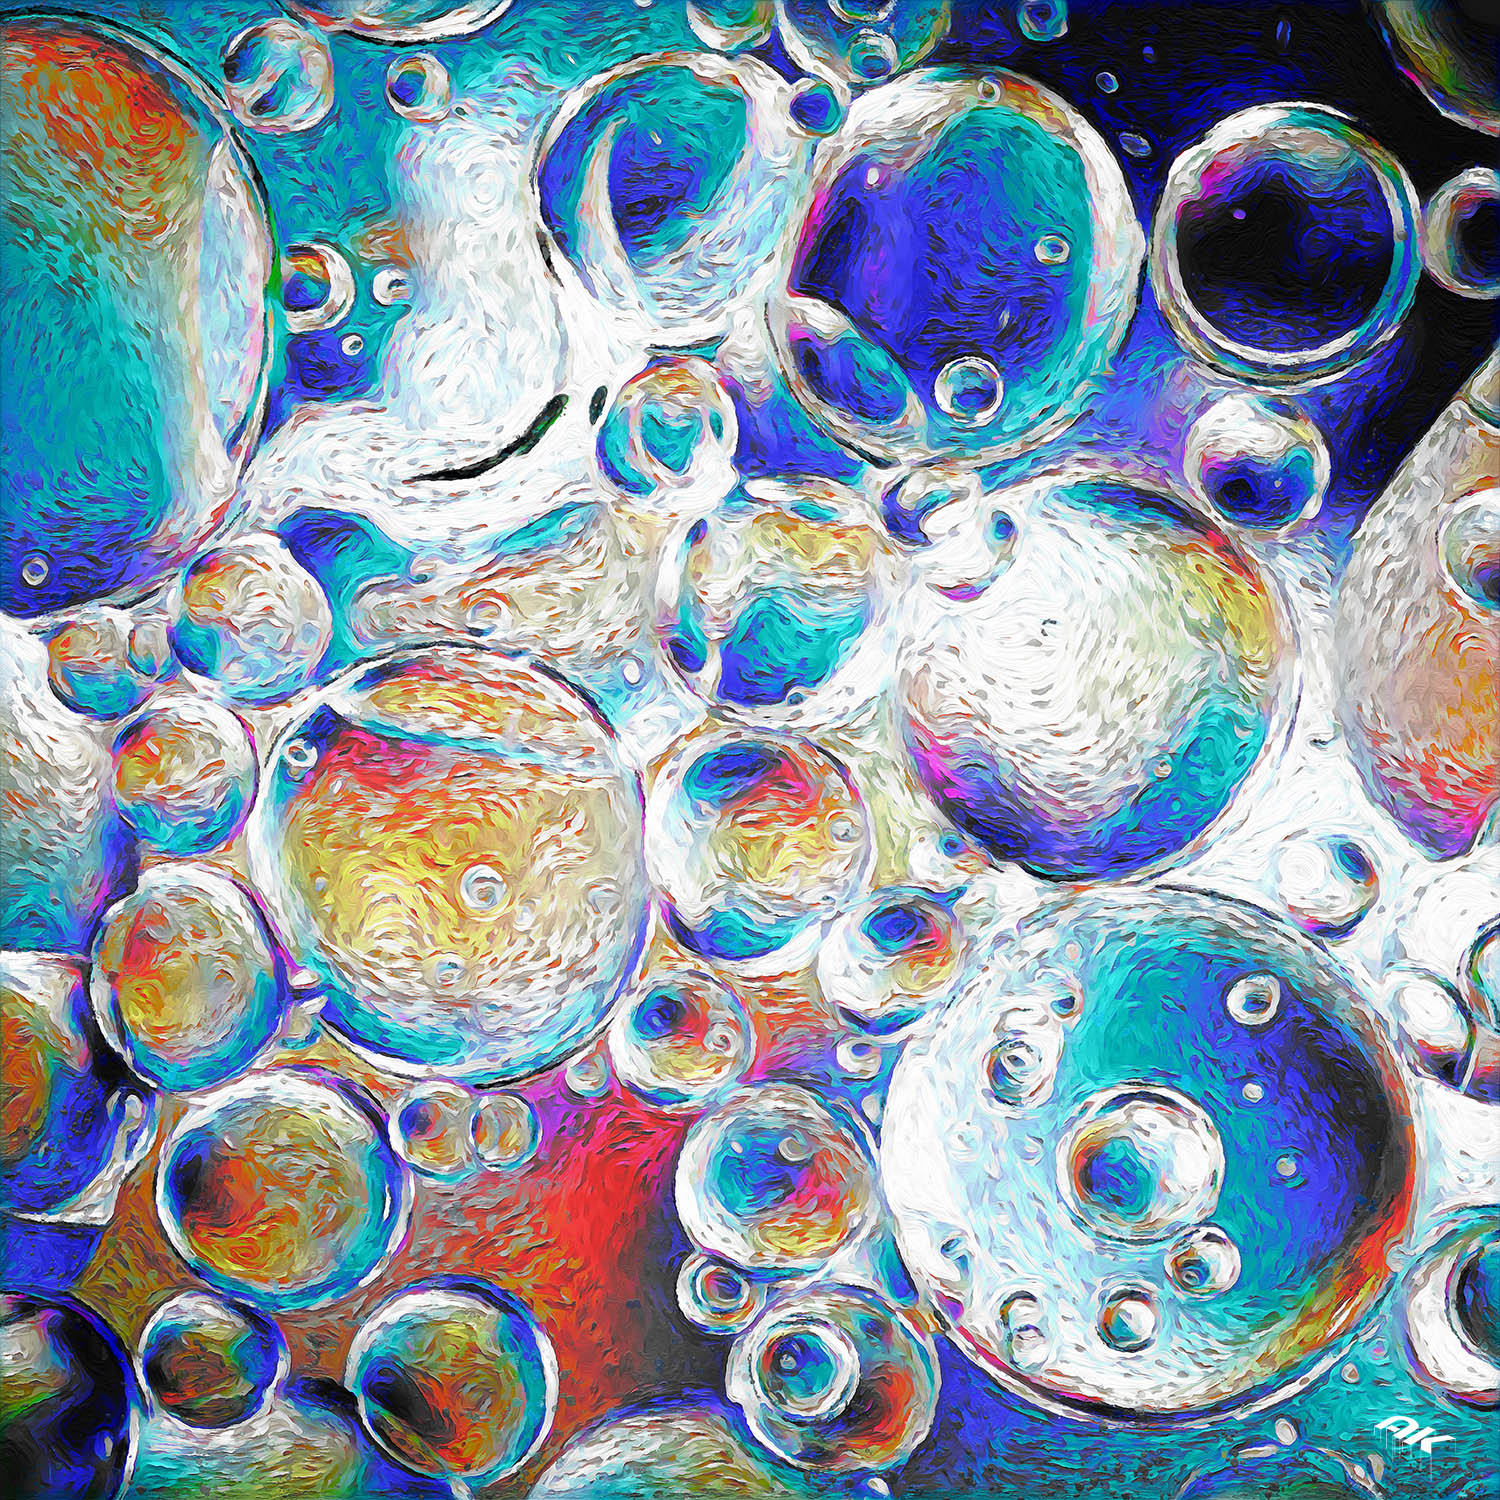 oil bubbles on water surface